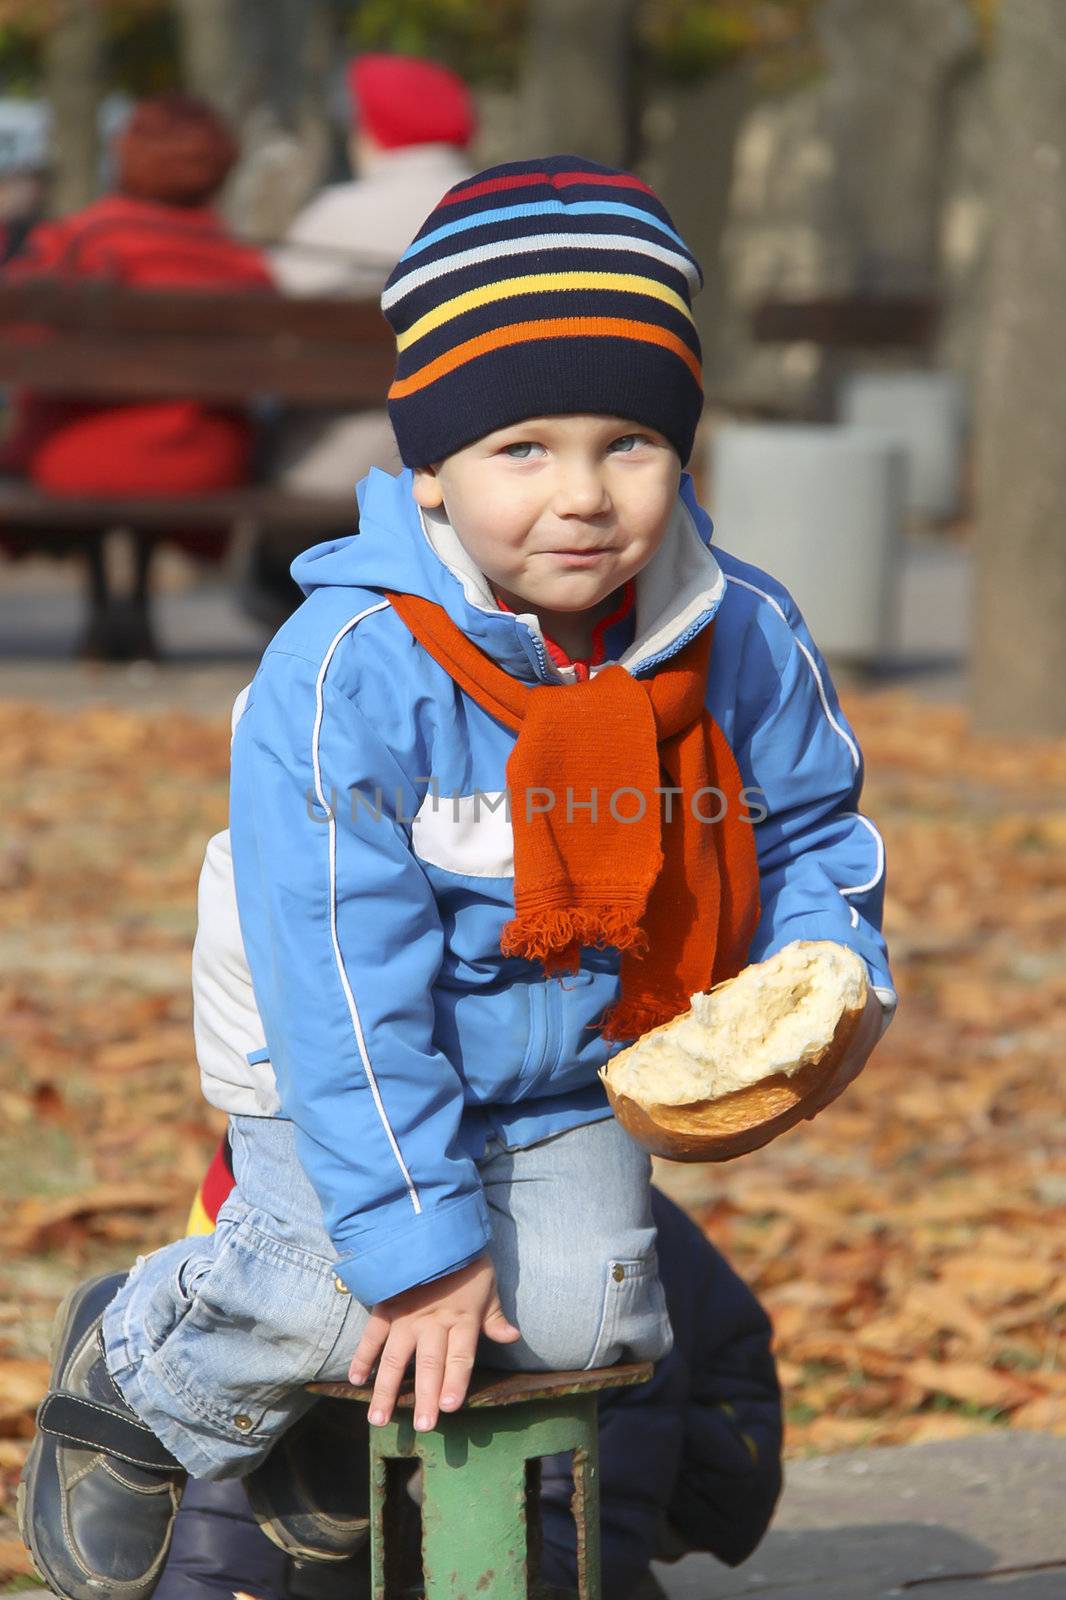 Cheerful boy with the bread in his hand playing in autumn park by NickNick